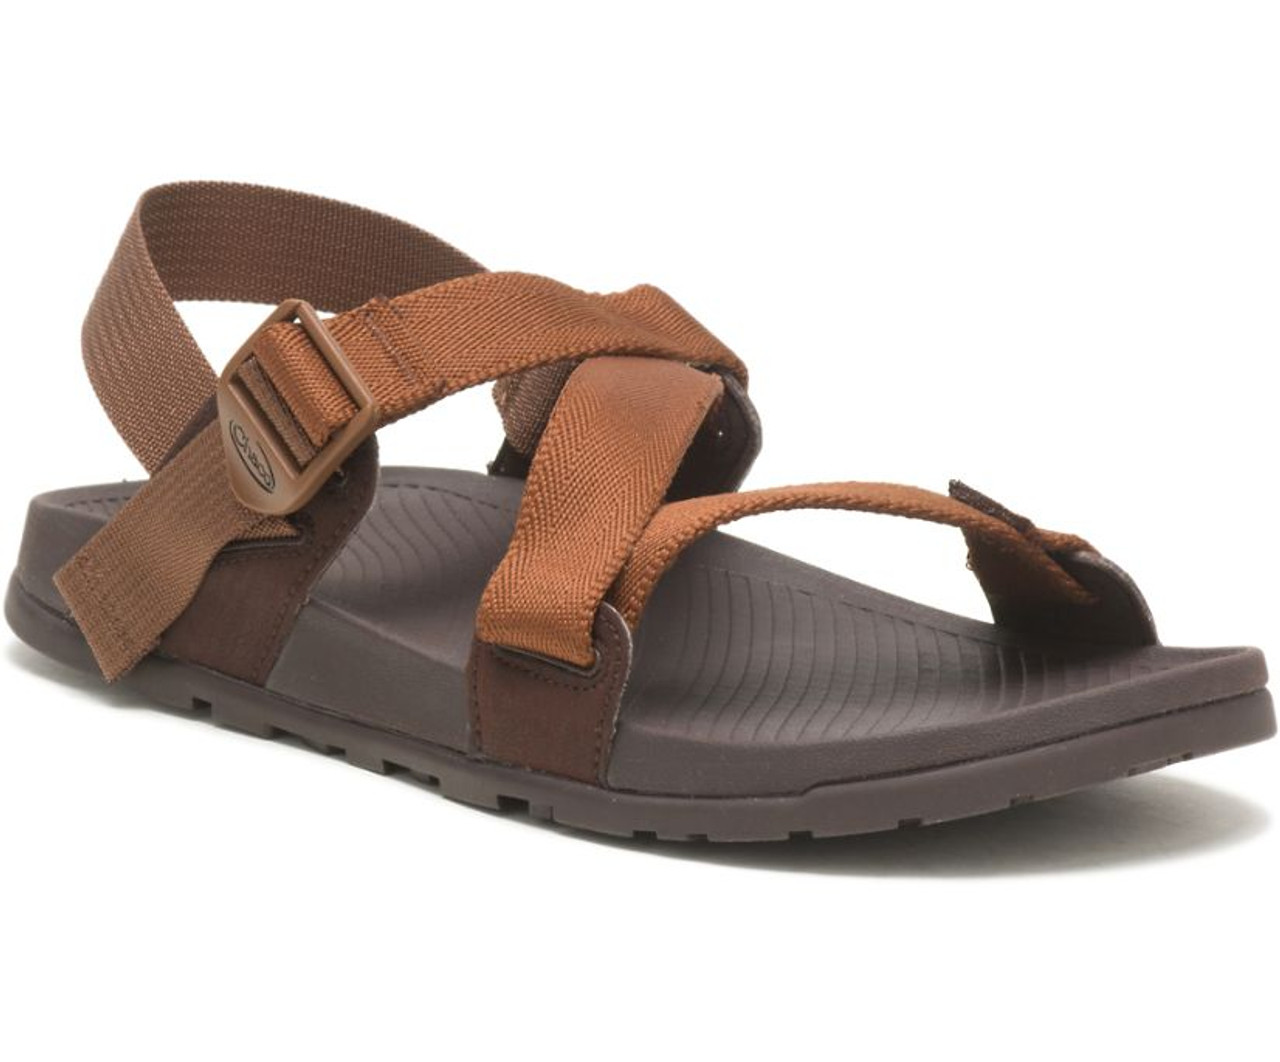 The Comfortable Chaco Wayfarer Sandals Are 41% Off on Amazon